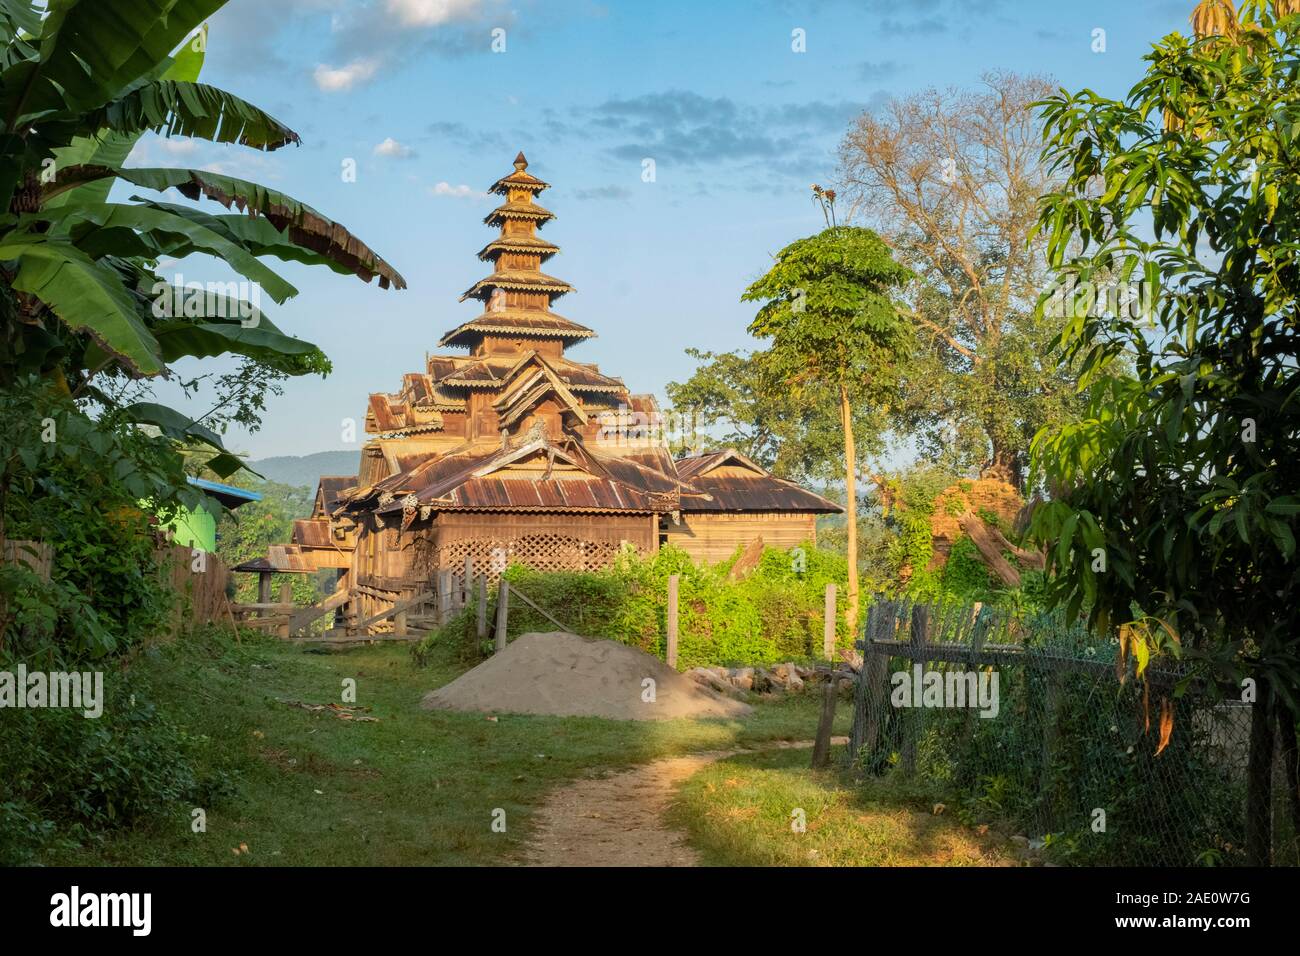 A beautiful architectural temple made of wood at the base of a footpath in a remote village in northwestern Myanmar (Burma) Stock Photo